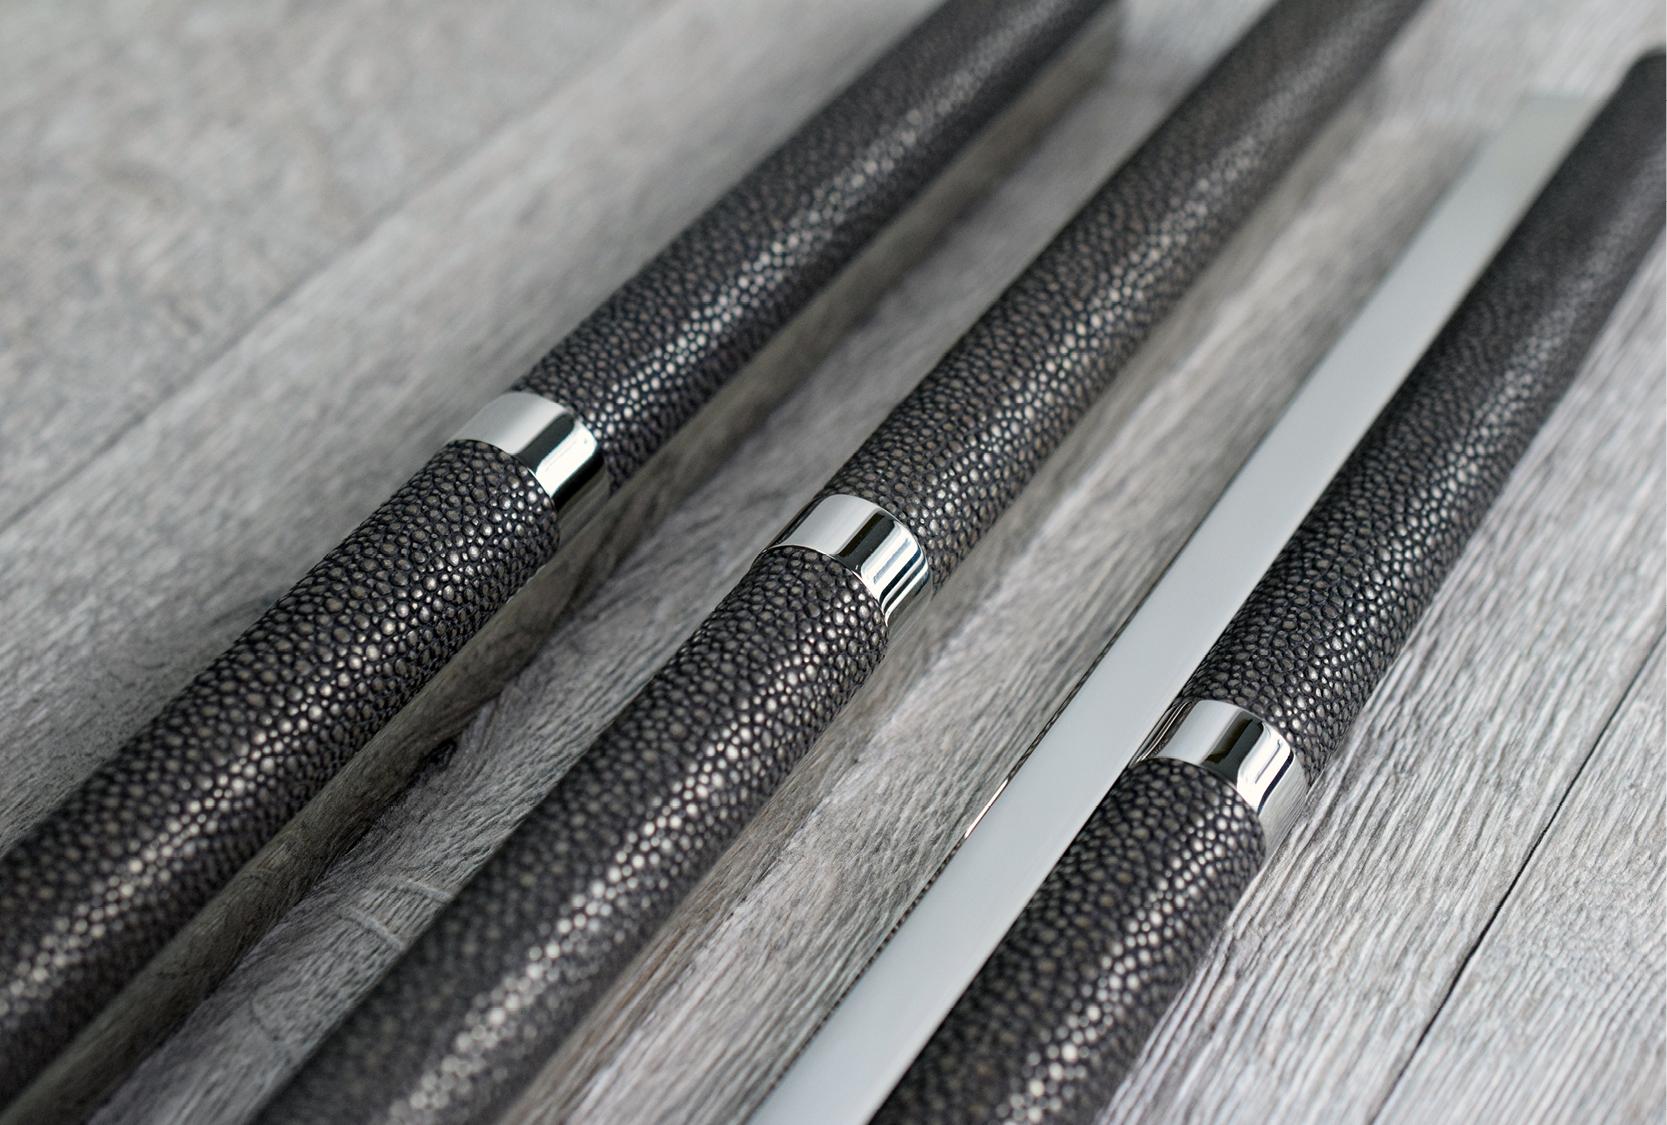 Image displays three custom shagreen design multi grip pull handles. The pull handle grip is finished in Alupewt with a bright chrome metal finish.